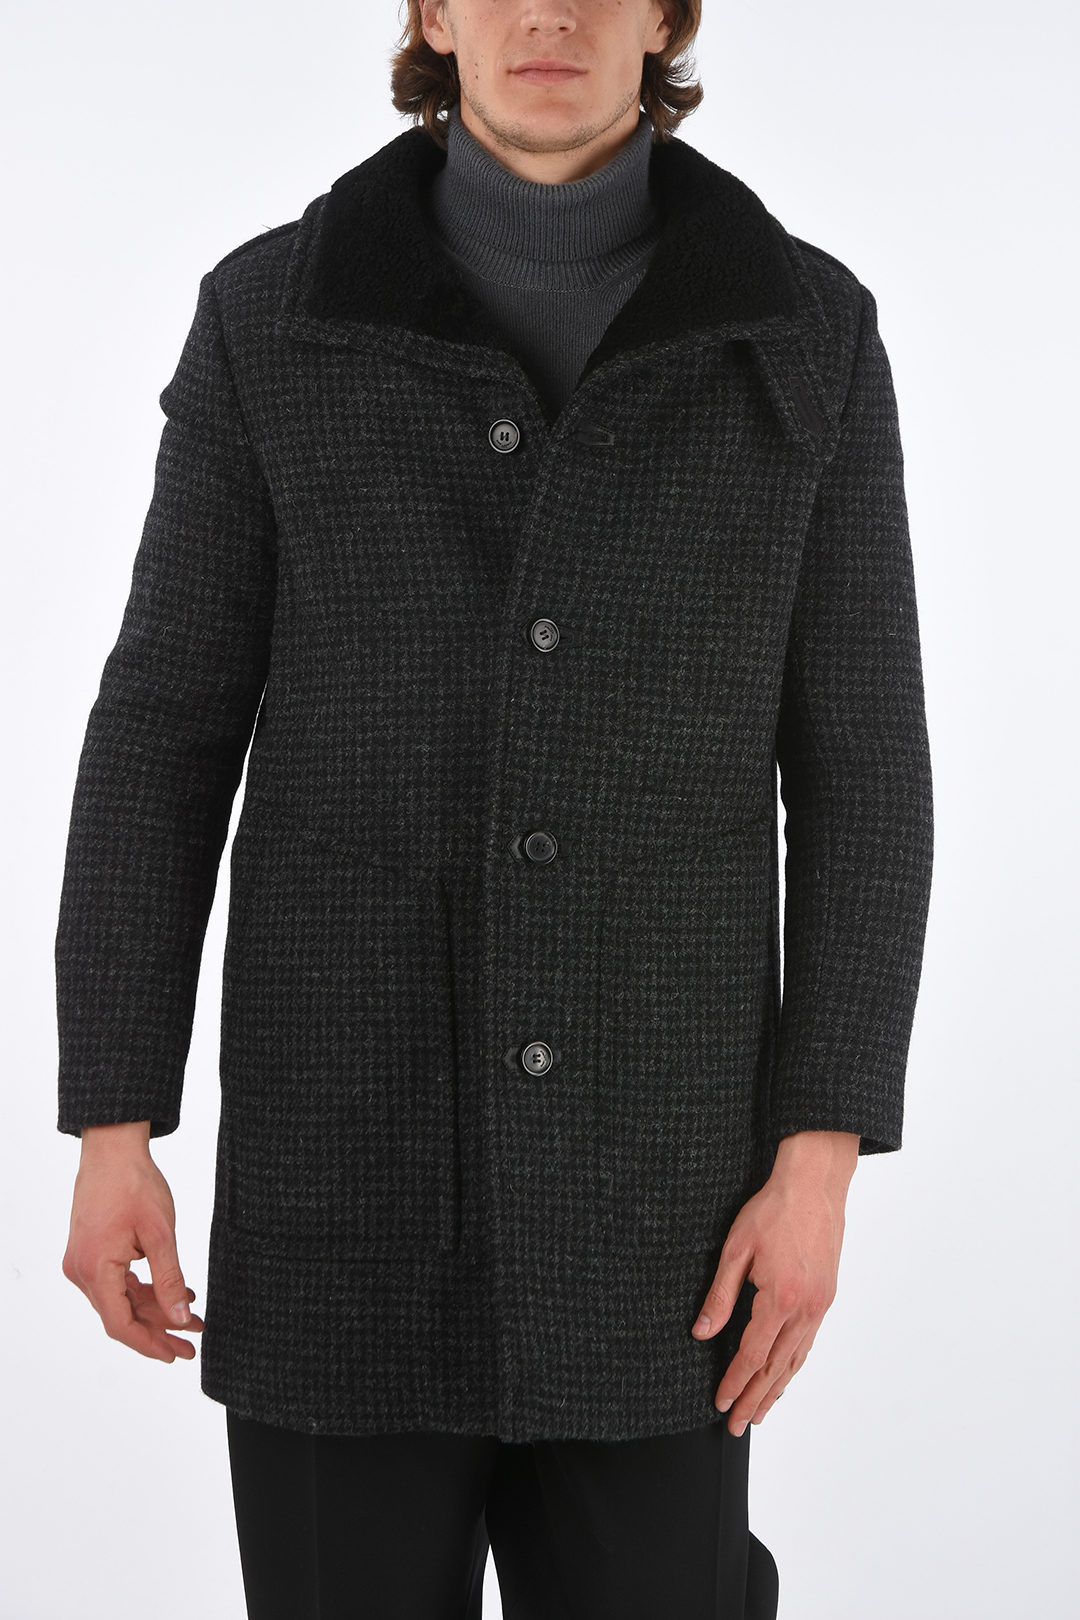 Saint Laurent Houndstooth Wool Coat with Shearling Collar men - Glamood  Outlet